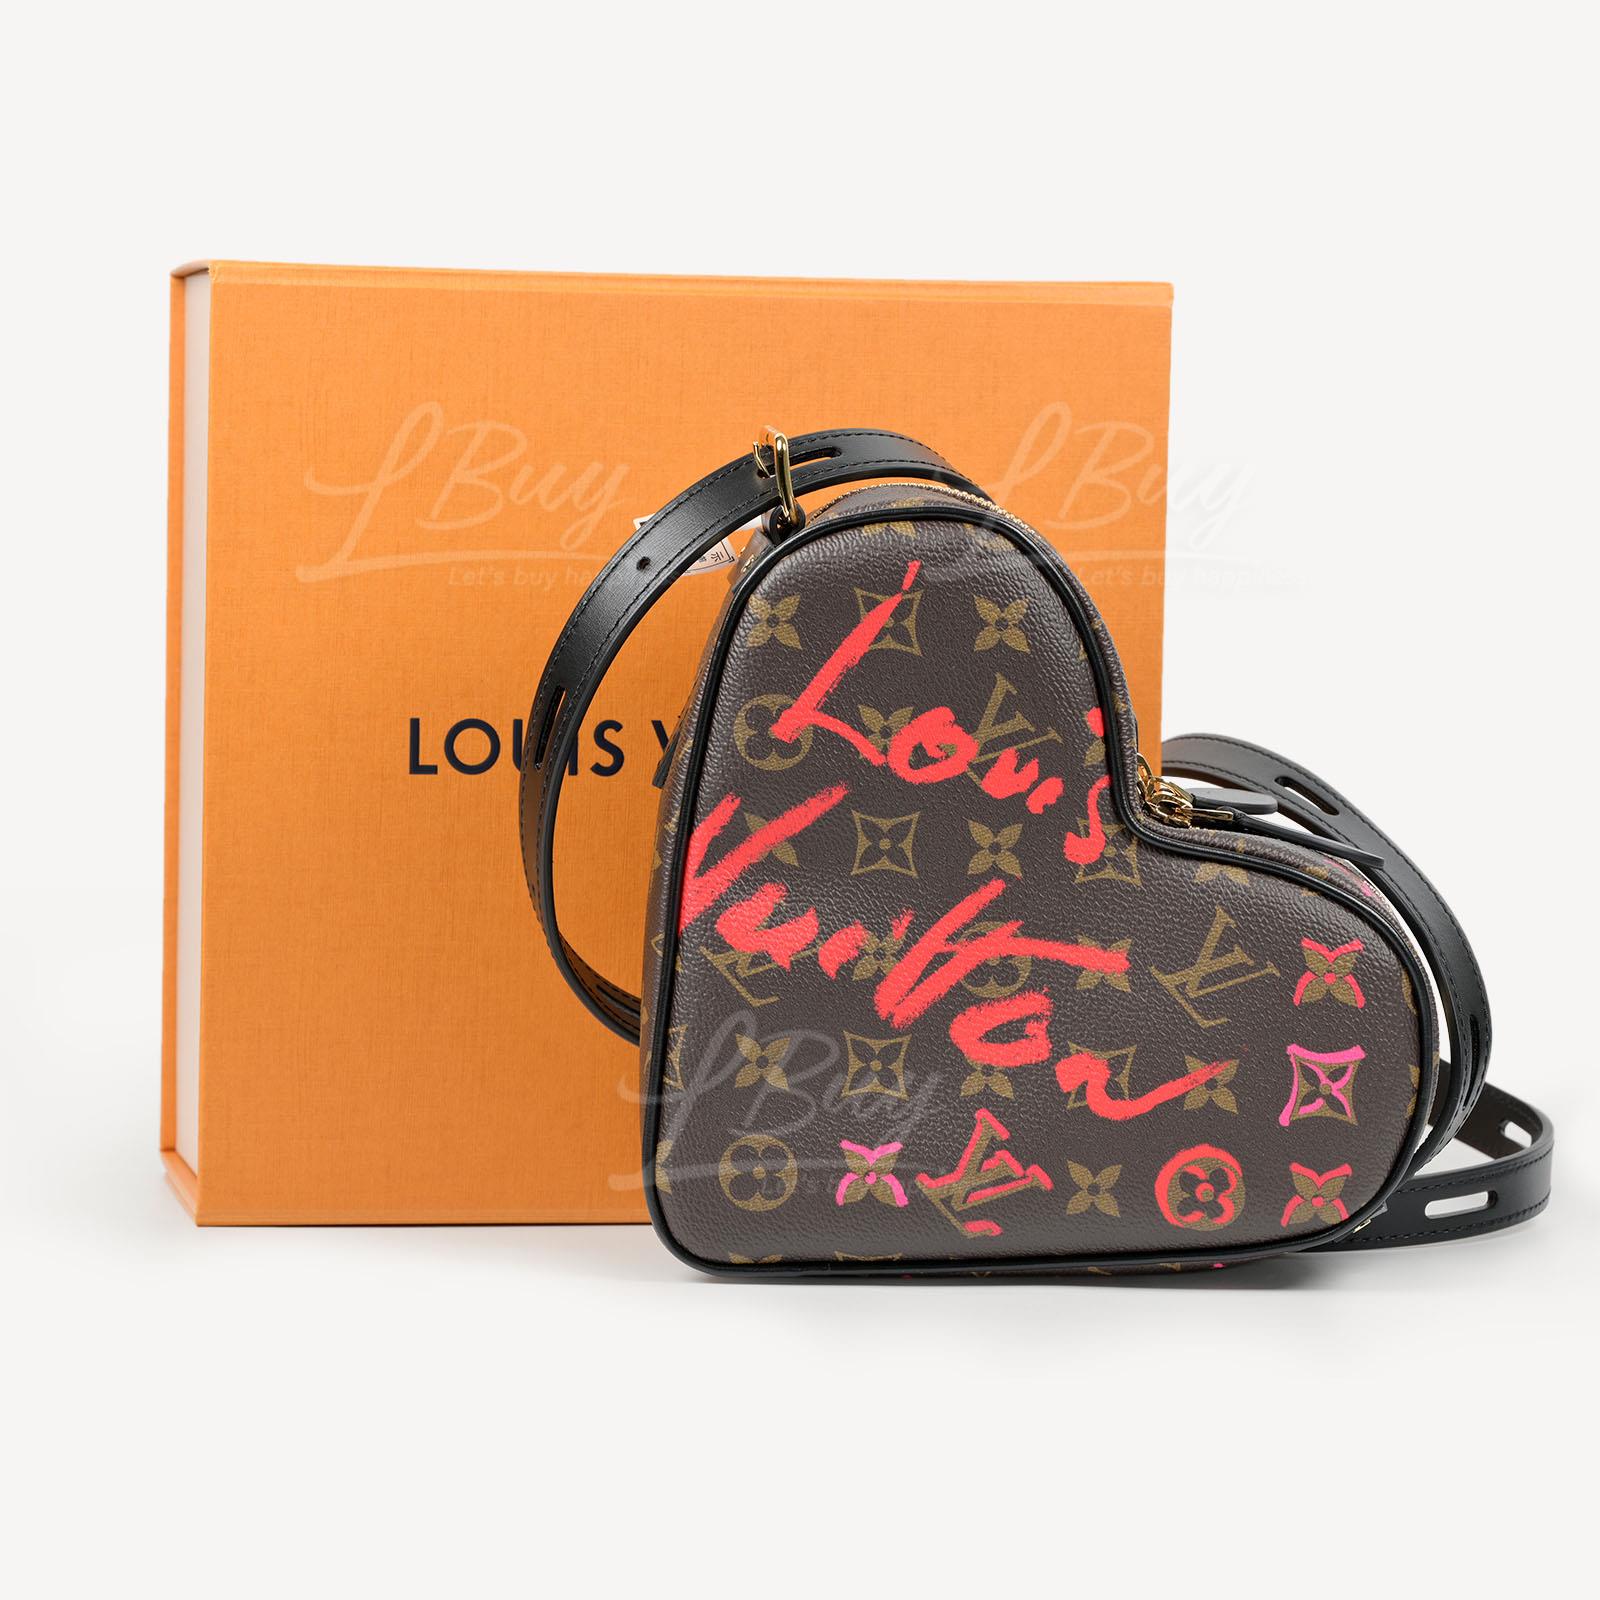 Unboxing Louis Vuitton China exclusive collection heart bag Sac Coeur,  compare to Gucci Bamboo sling 